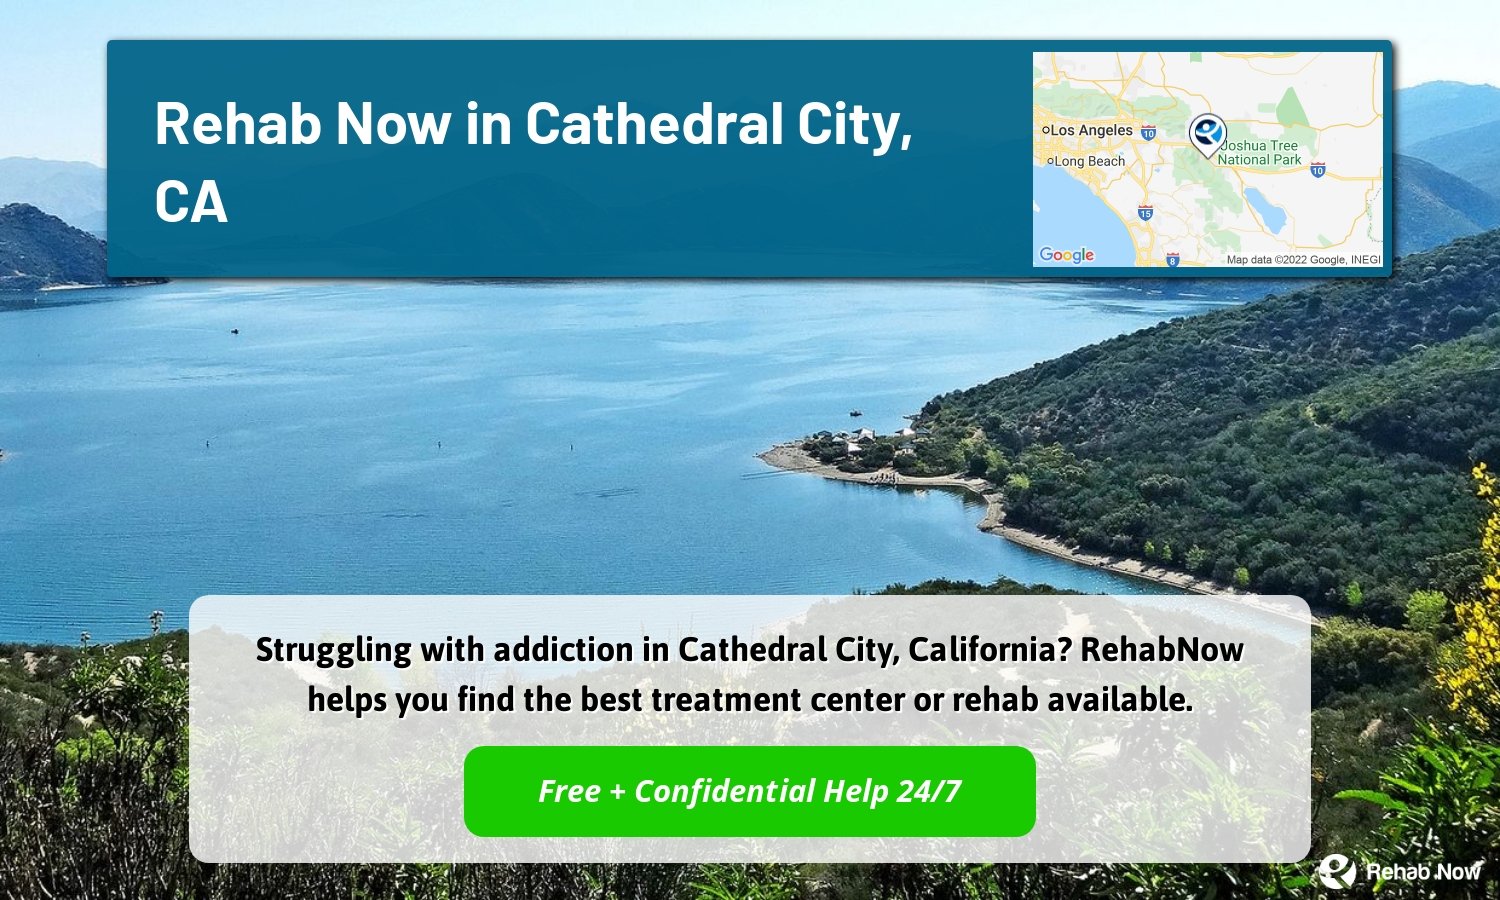 Struggling with addiction in Cathedral City, California? RehabNow helps you find the best treatment center or rehab available.